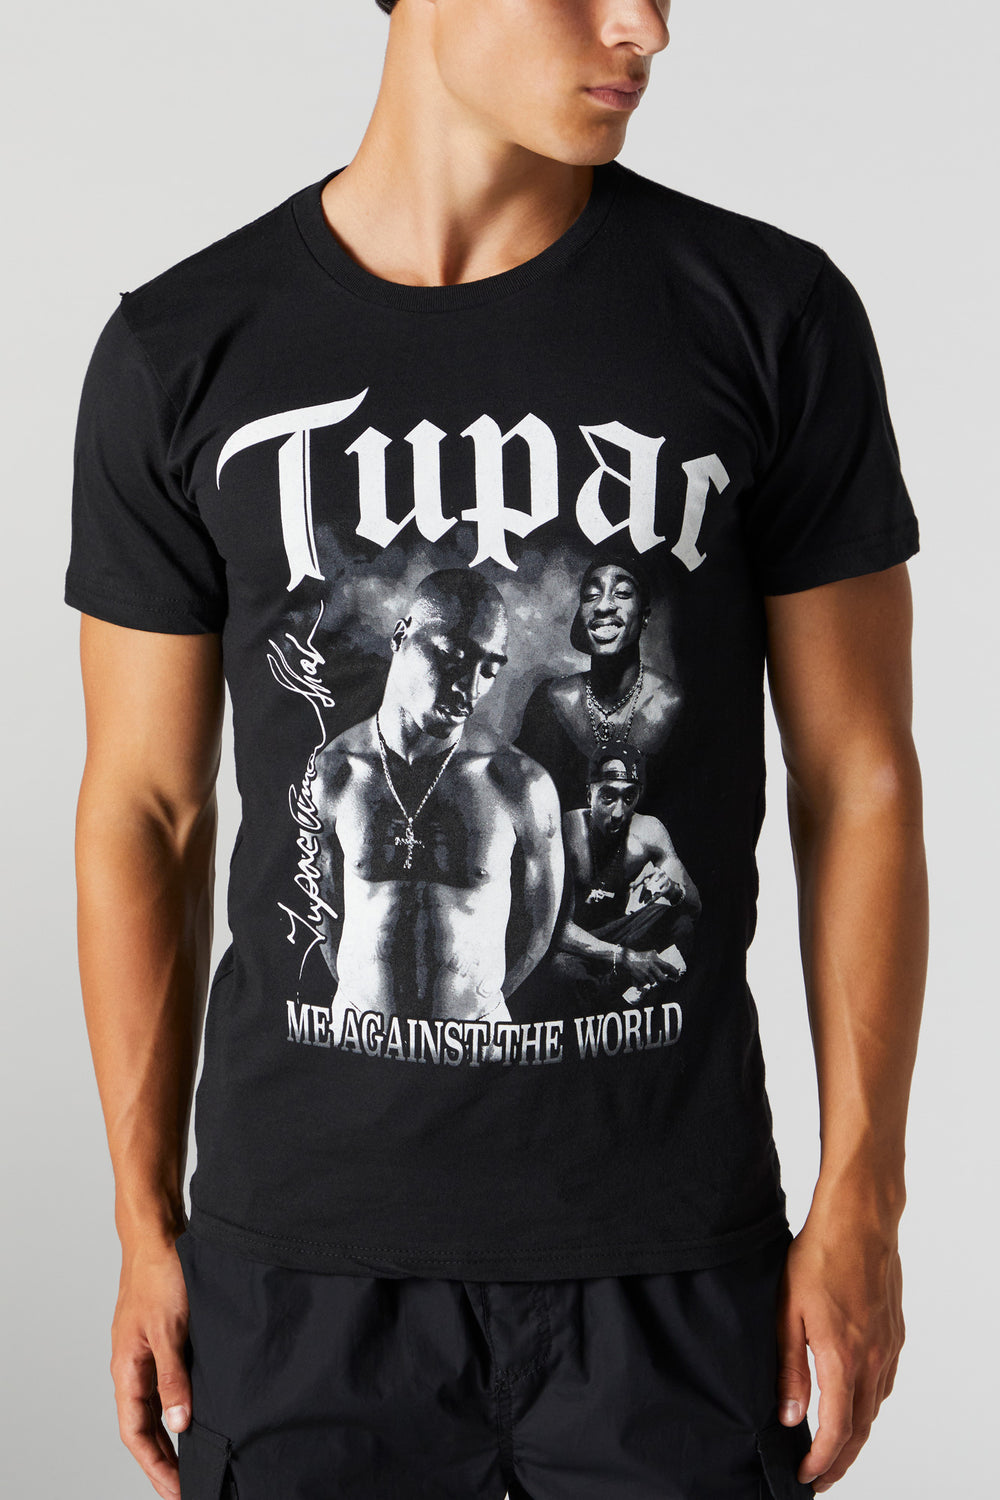 Tupac Me Against The World Graphic T-Shirt Tupac Me Against The World Graphic T-Shirt 2